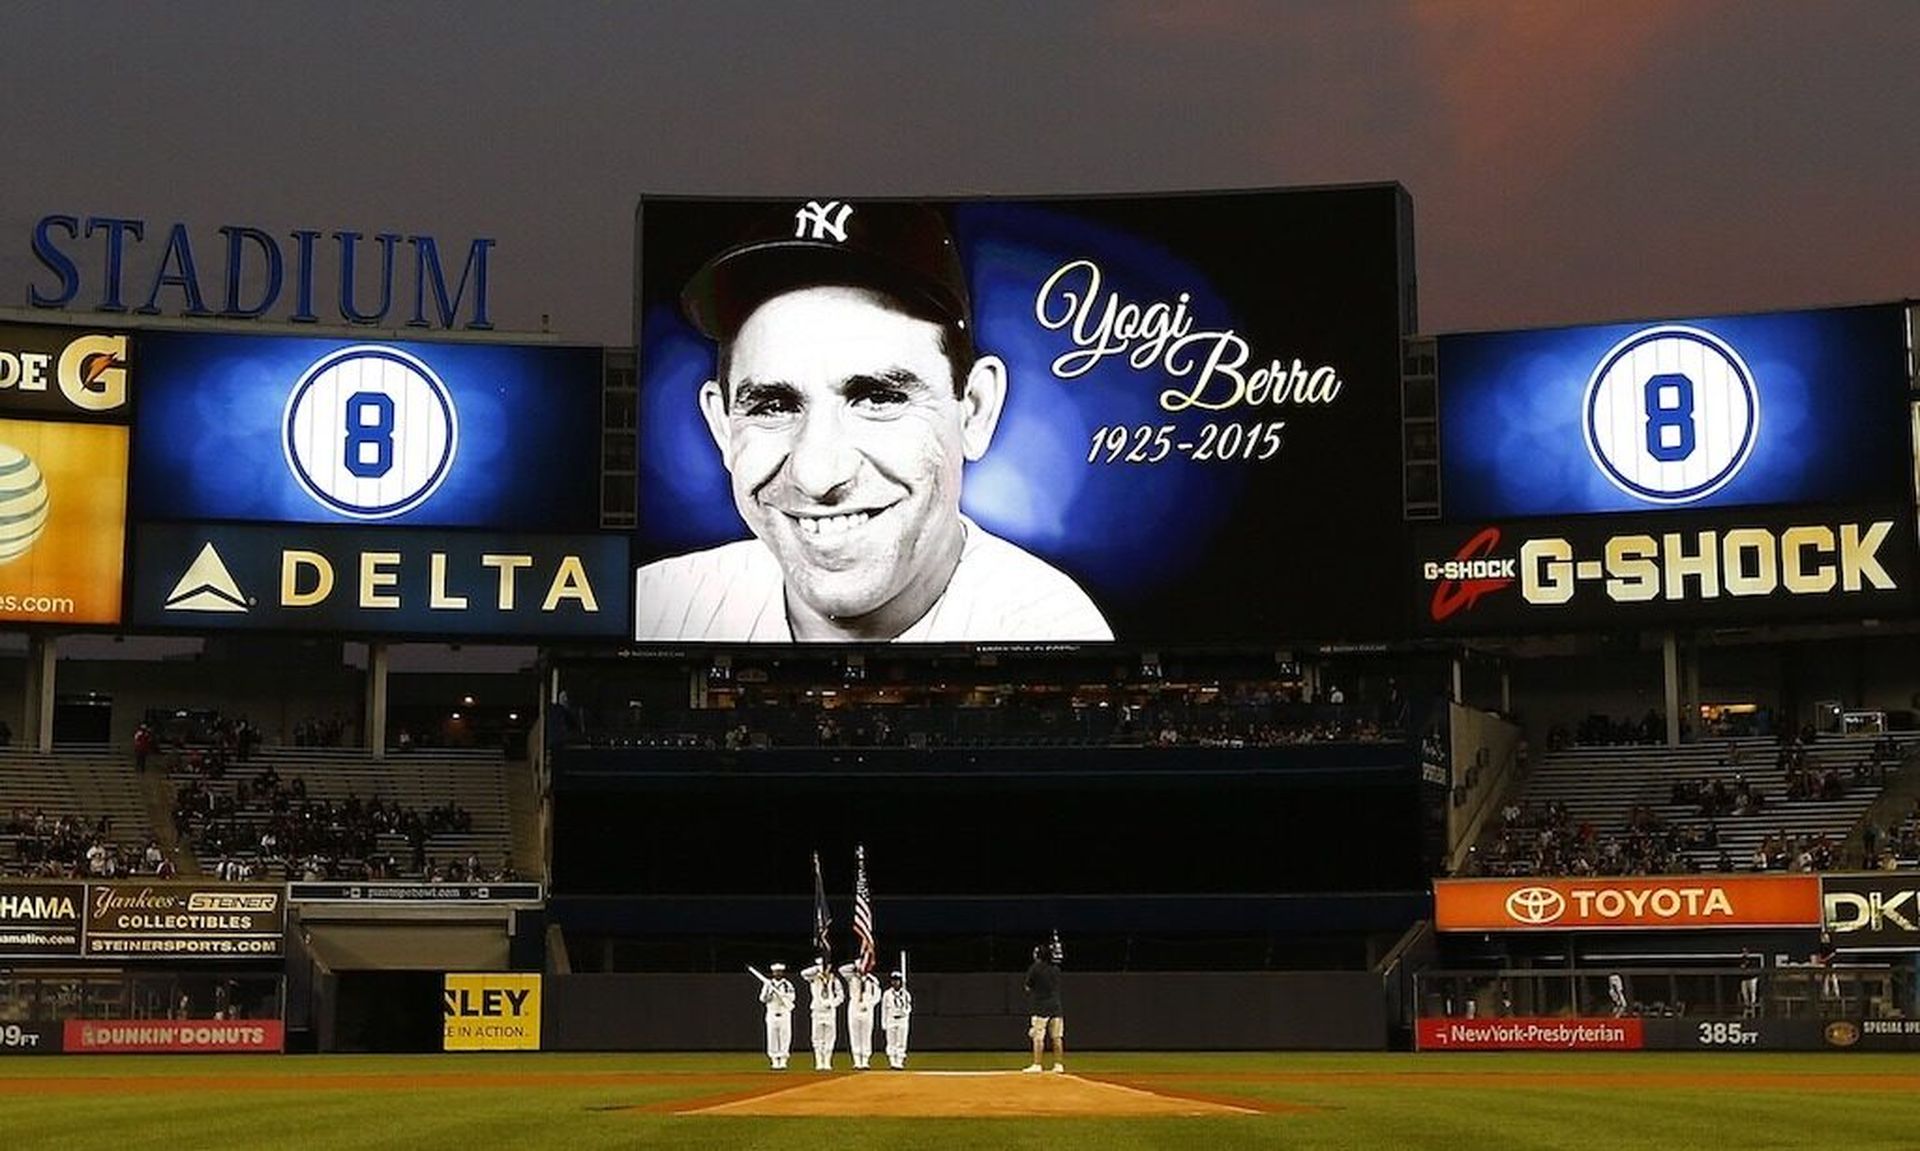 A moment of silence for baseball great Yogi Berra at Yankee Stadium the week he passed in September 2015. Today’s columnist, John Scimone of Dell Technologies, agrees with Yogi that it’s hard to make predictions: especially about the future. And that’s why he opted not to make predictions for 2022, but wrote about three perennial challenges the ind...